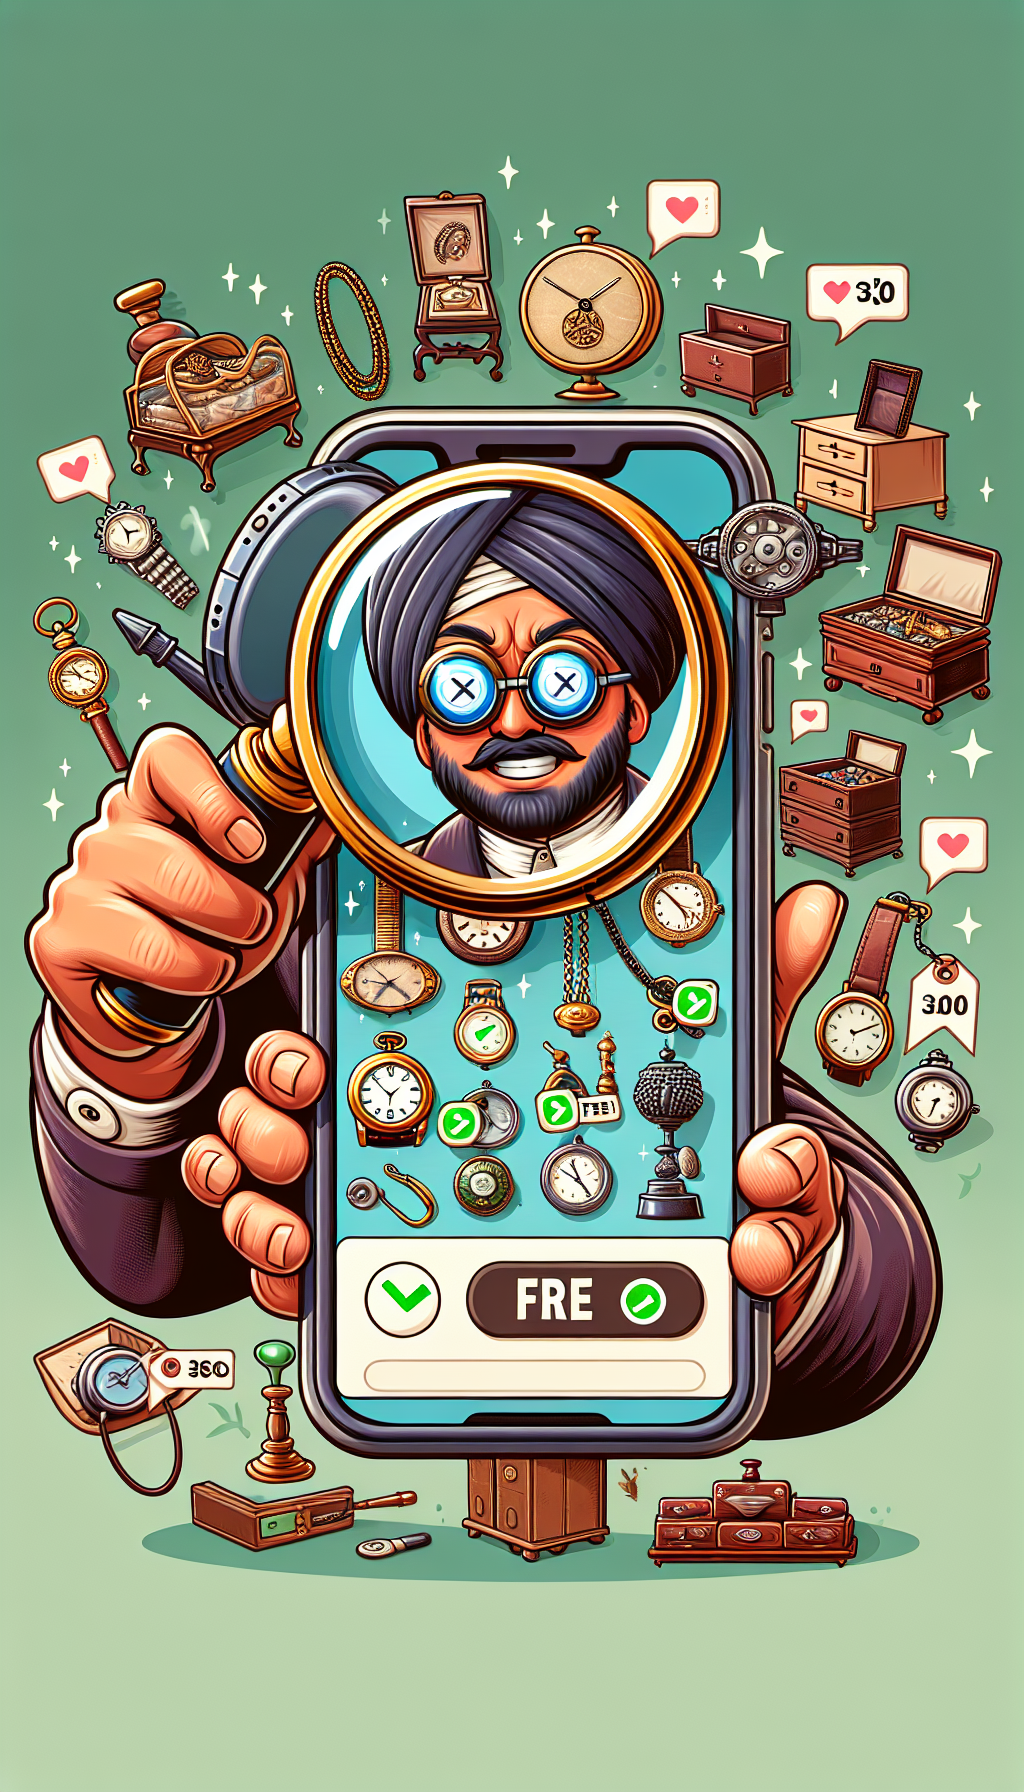 An illustration showcasing an excited character holding a smartphone, with a classic magnifying glass projecting from the screen like a virtual lens over various antiques like clocks, jewelry, and furniture. Tiny digital price tags float above the items with green checkmarks, signaling successful appraisals, while app icons and a "Free" ribbon banner intertwine with the scene.